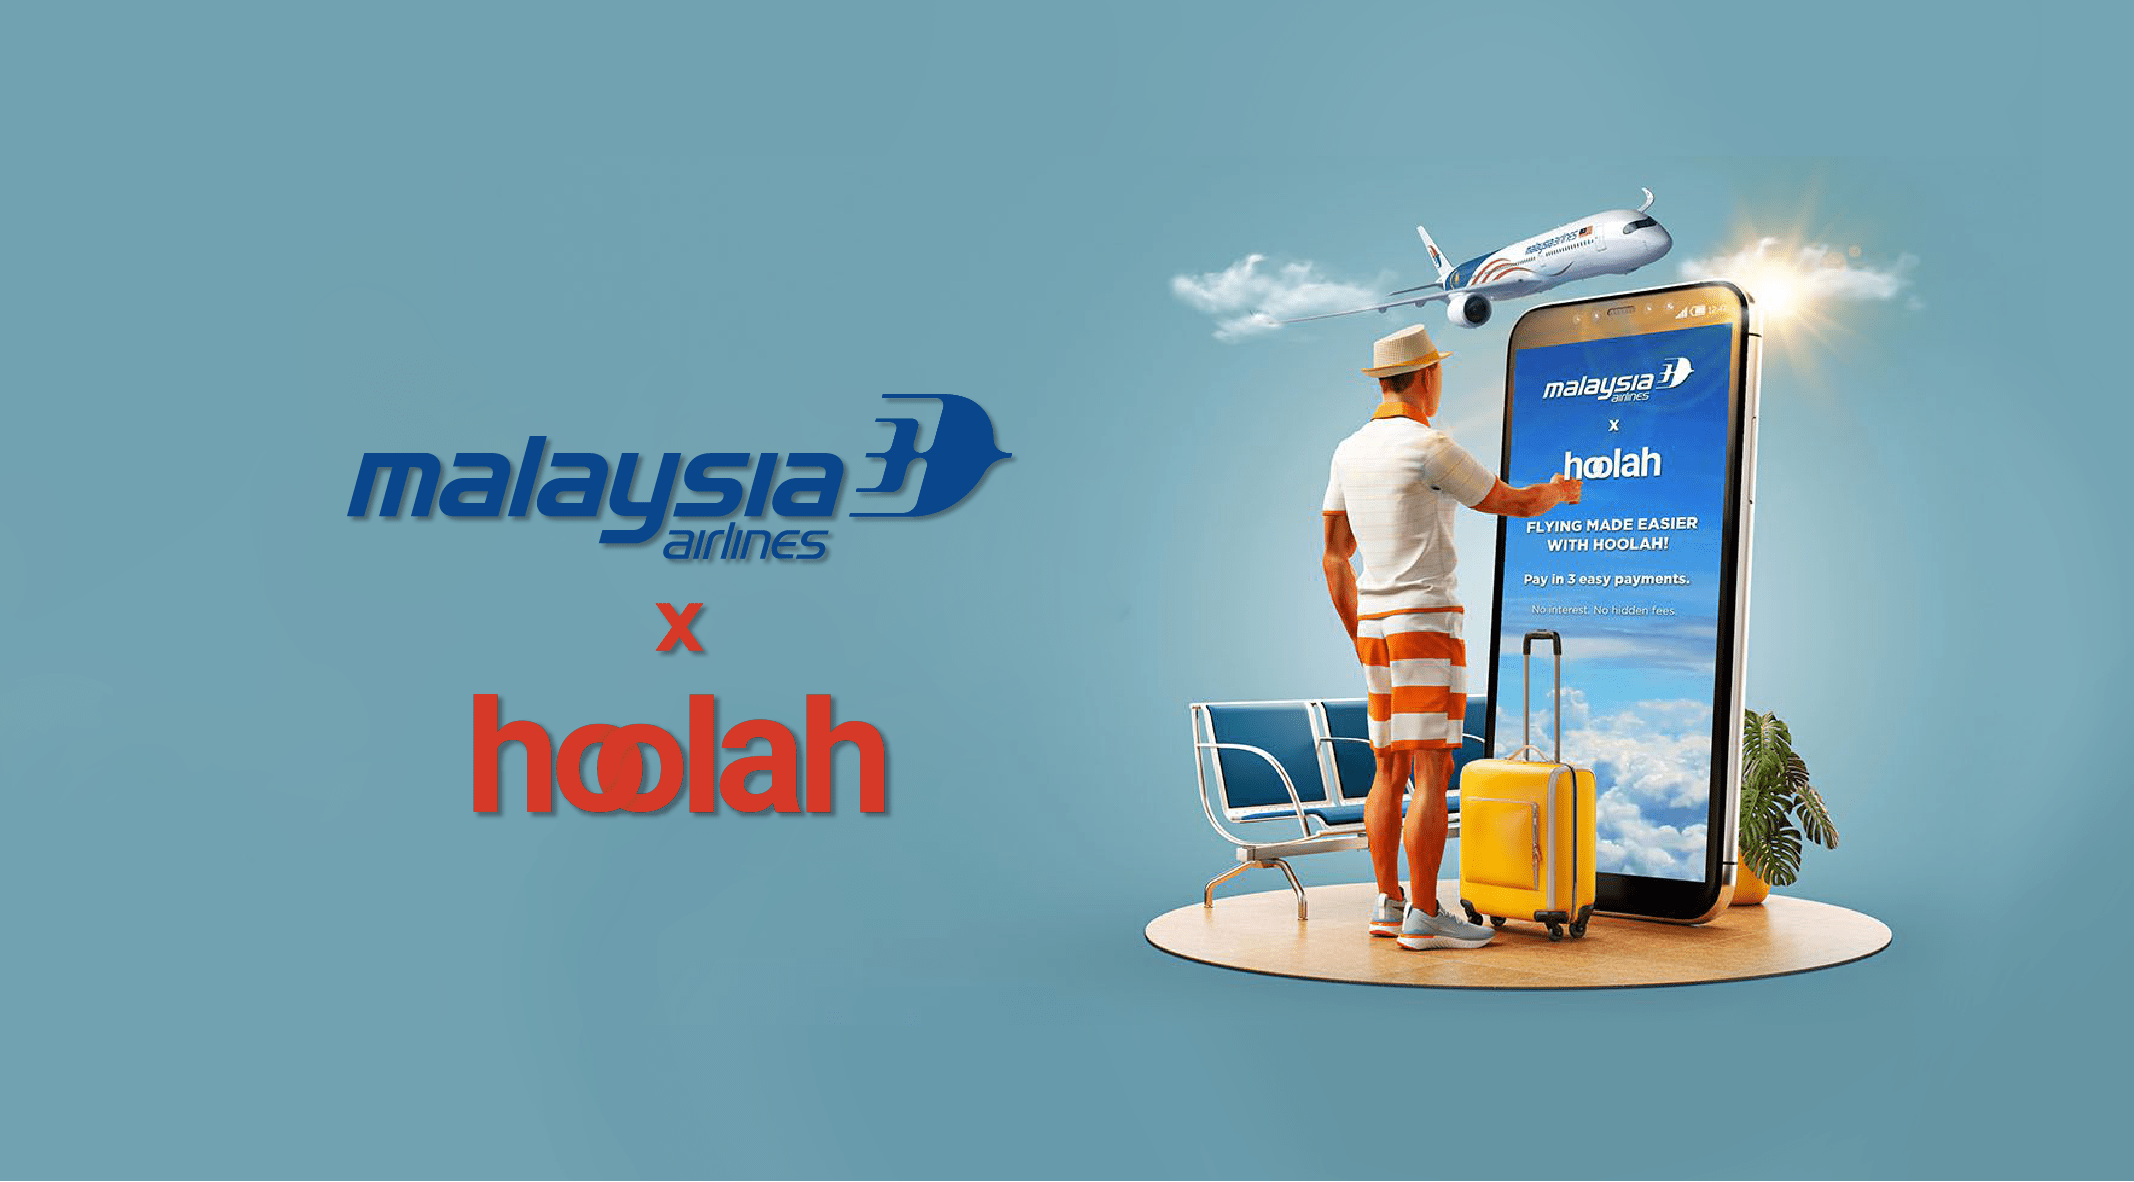 Malaysia Airlines Provides hoolah’s BNPL Payment Option for Its Fliers